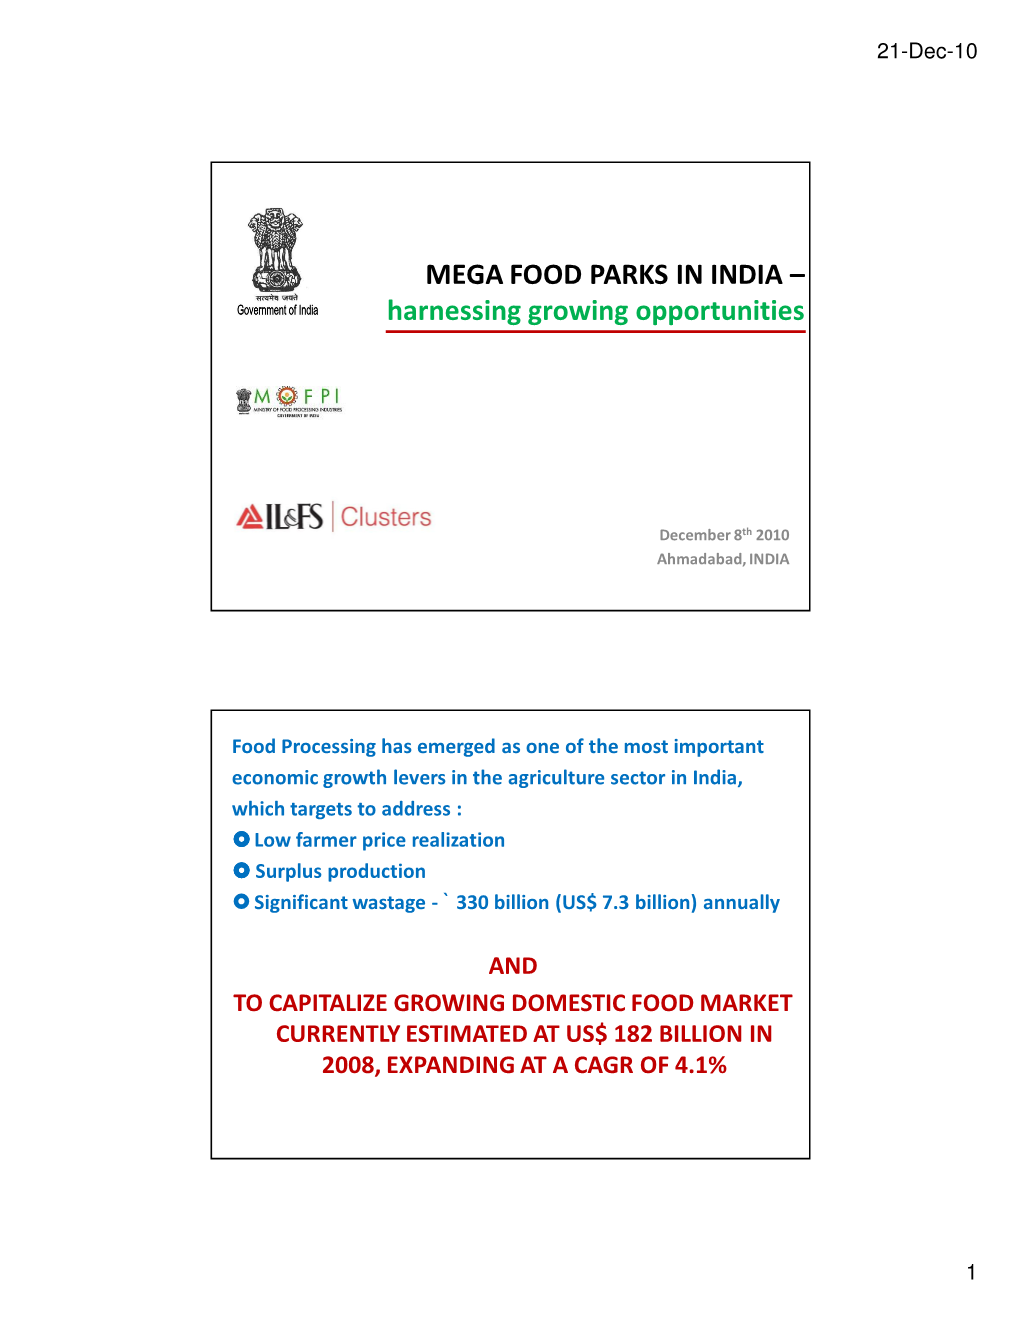 MEGA FOOD PARKS in INDIA – Harnessing Growing Opportunities